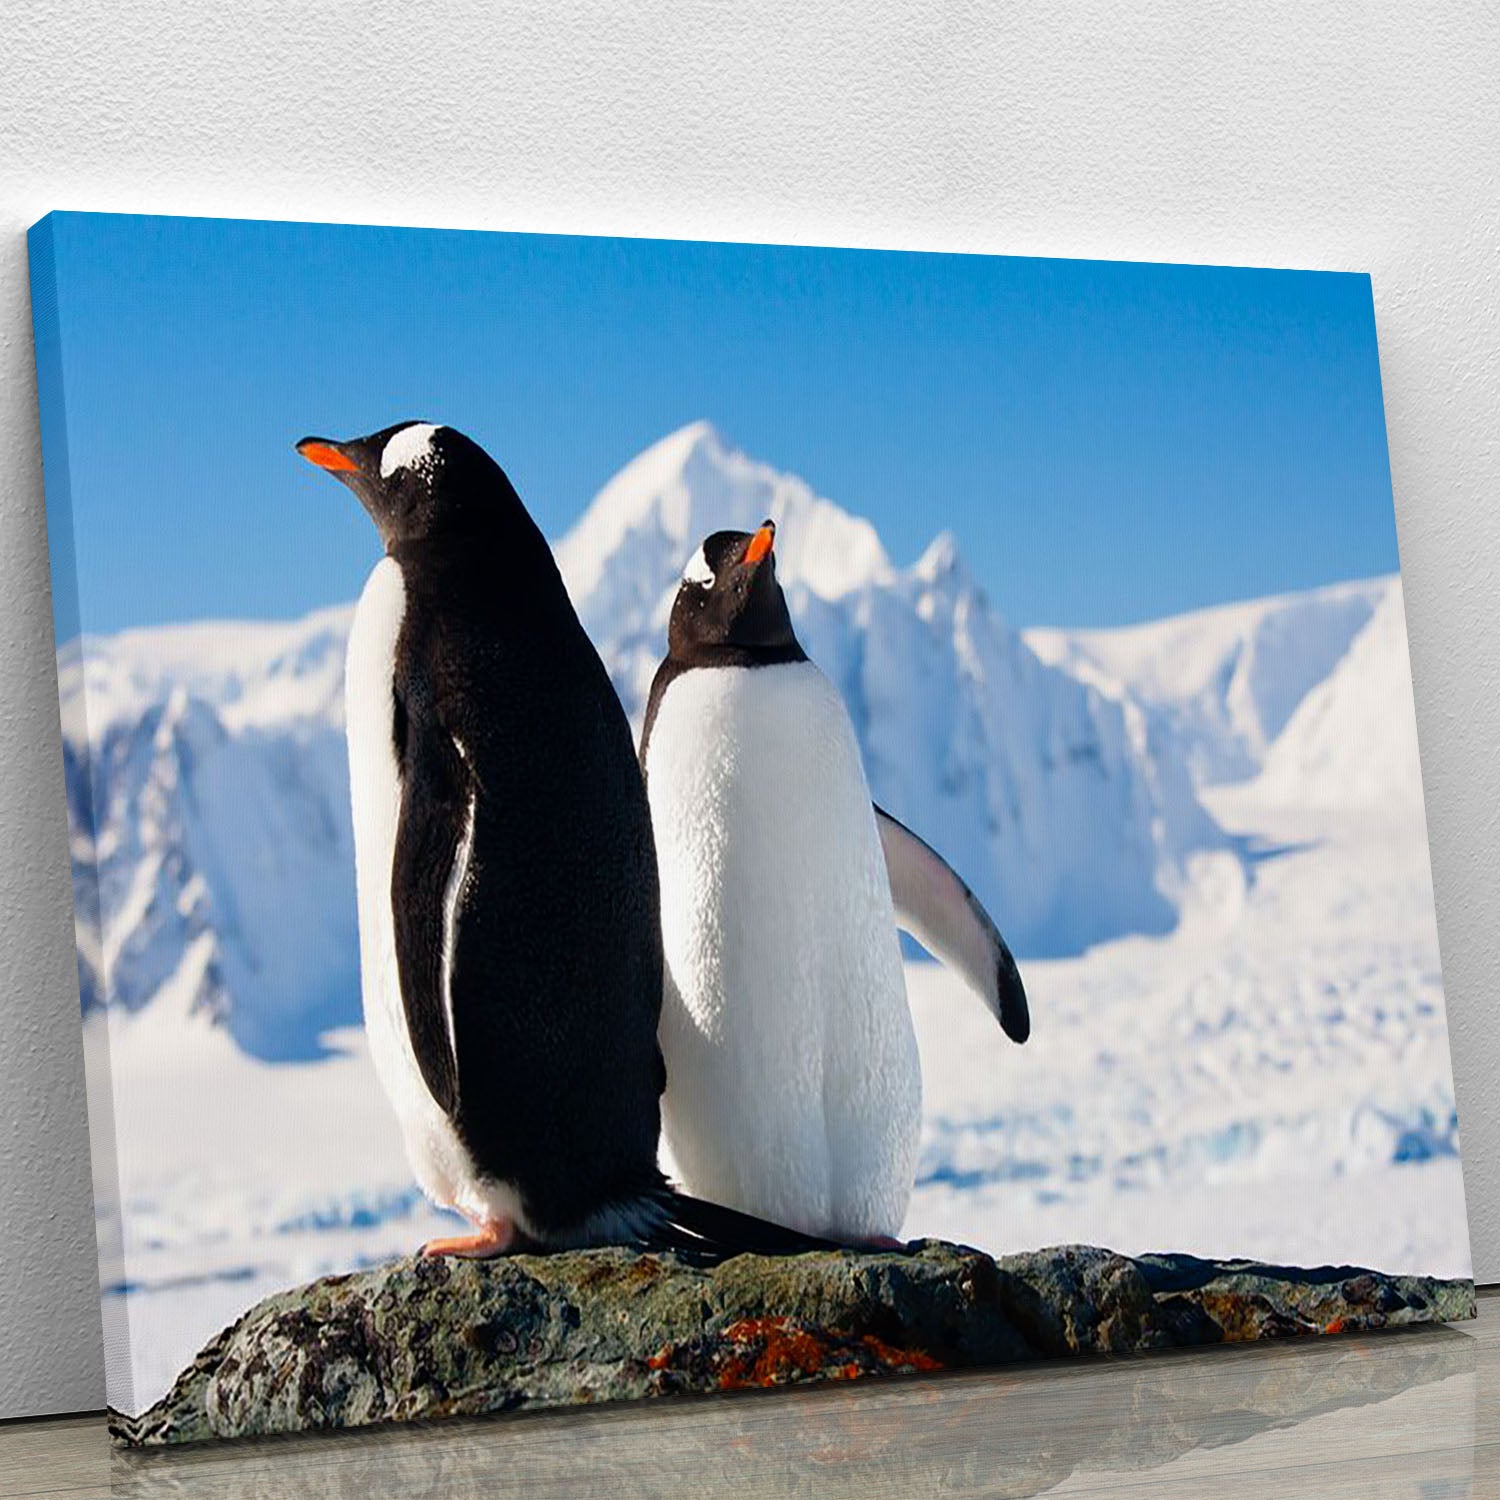 Two penguins dreaming together sitting on a rock Canvas Print or Poster - Canvas Art Rocks - 1